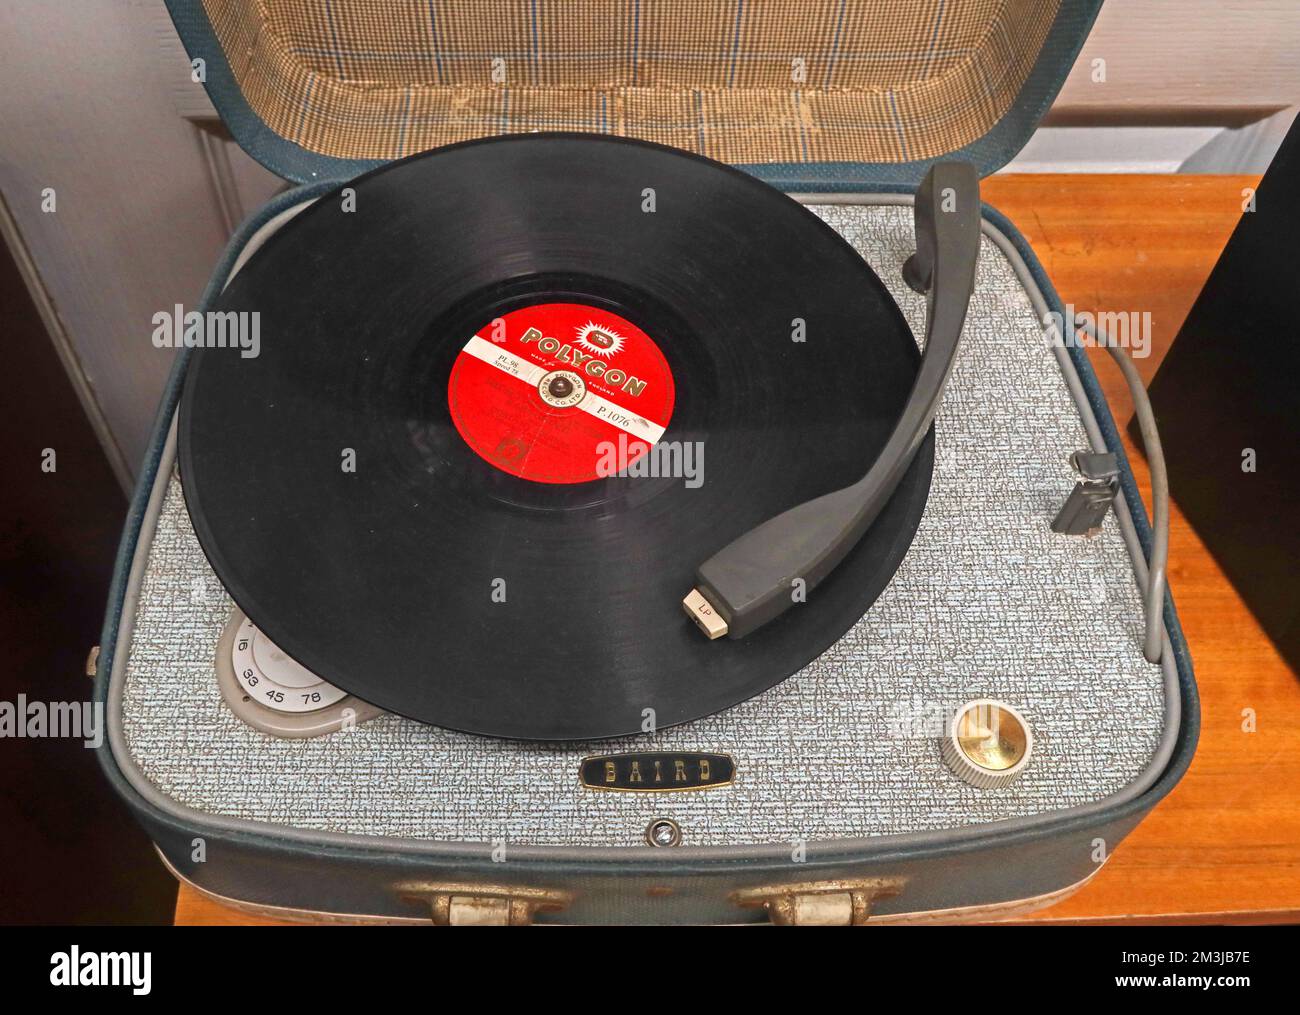 1960s Baird Record player, with Polygon vinyl 12' LP on the turntable Stock Photo